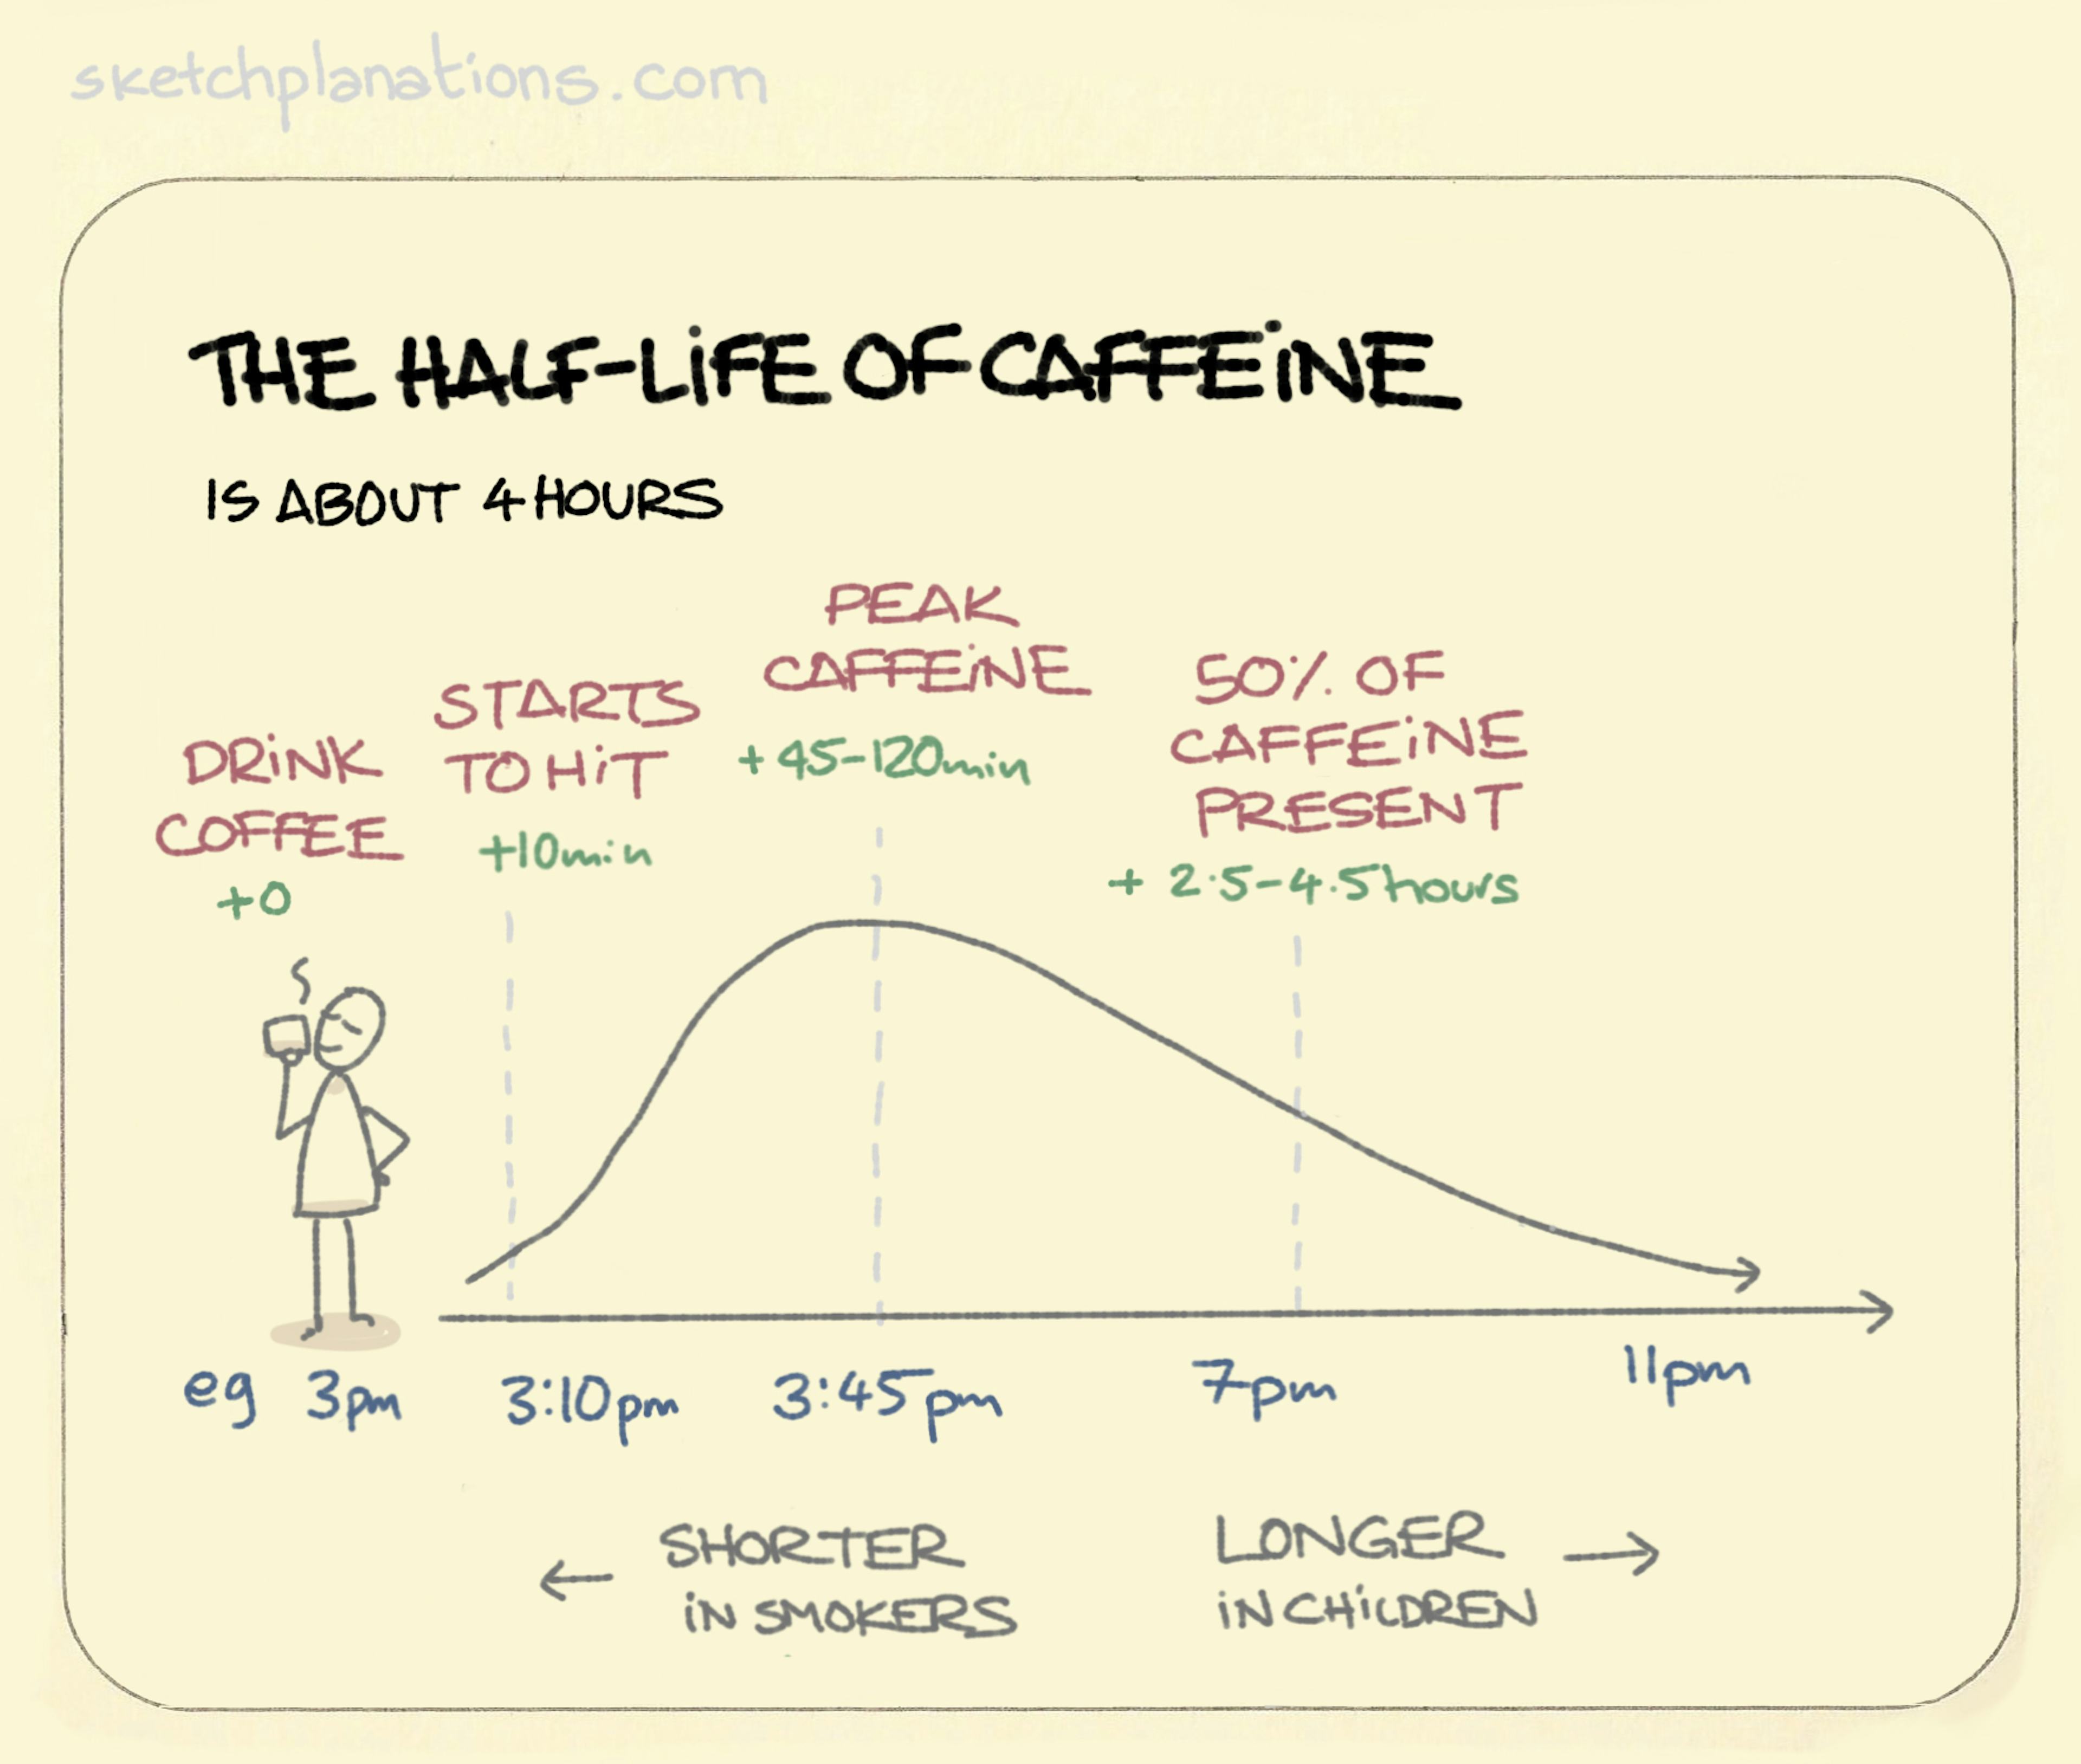 The half-life of caffeine illustration: showing the effect of caffeine rising then decreasing over time